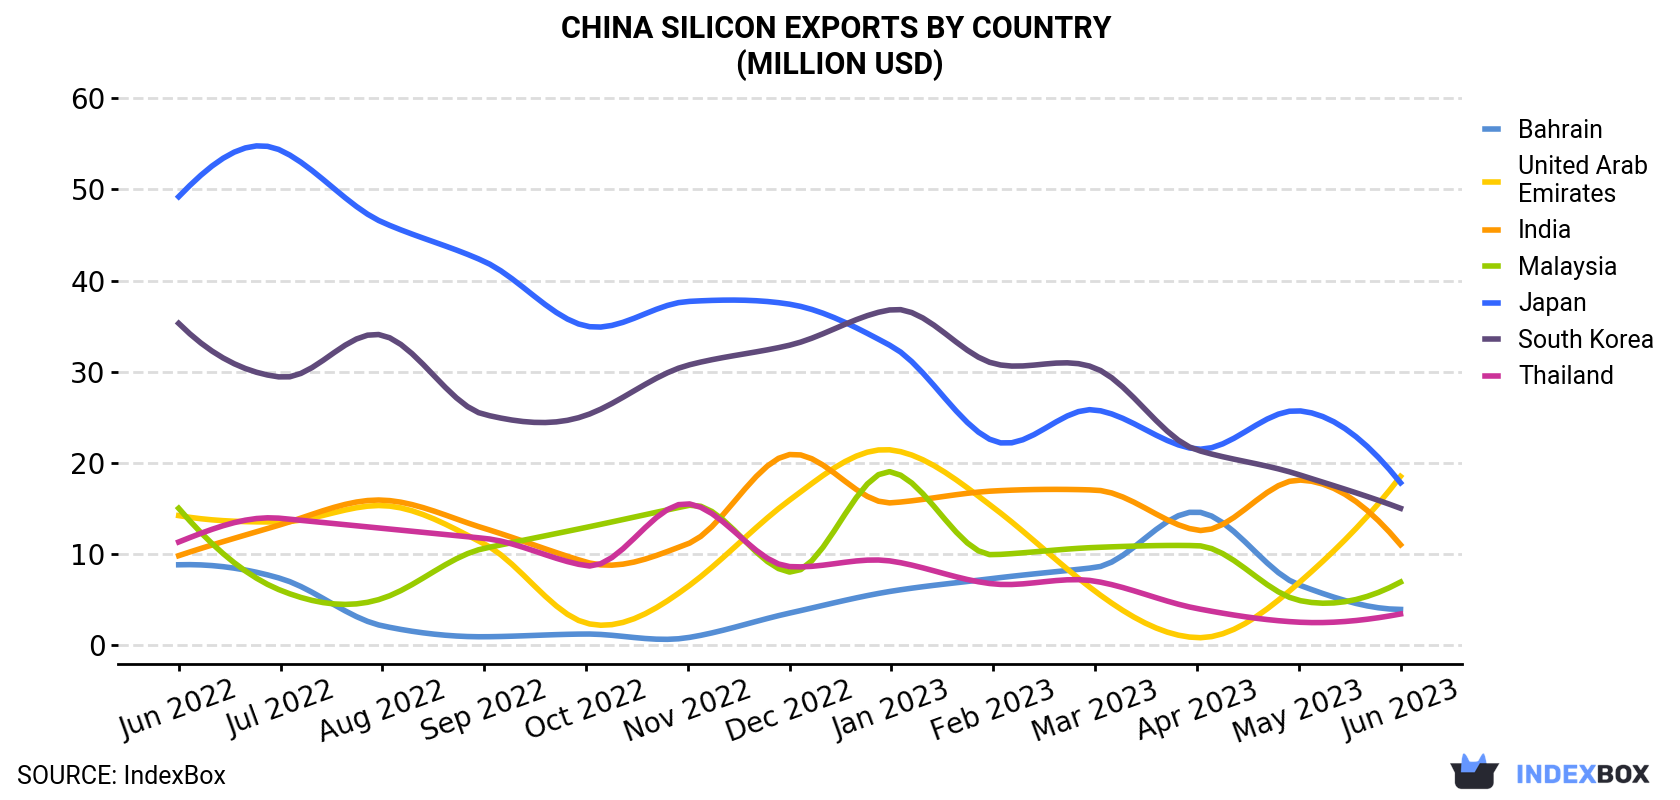 China Silicon Exports By Country (Million USD)